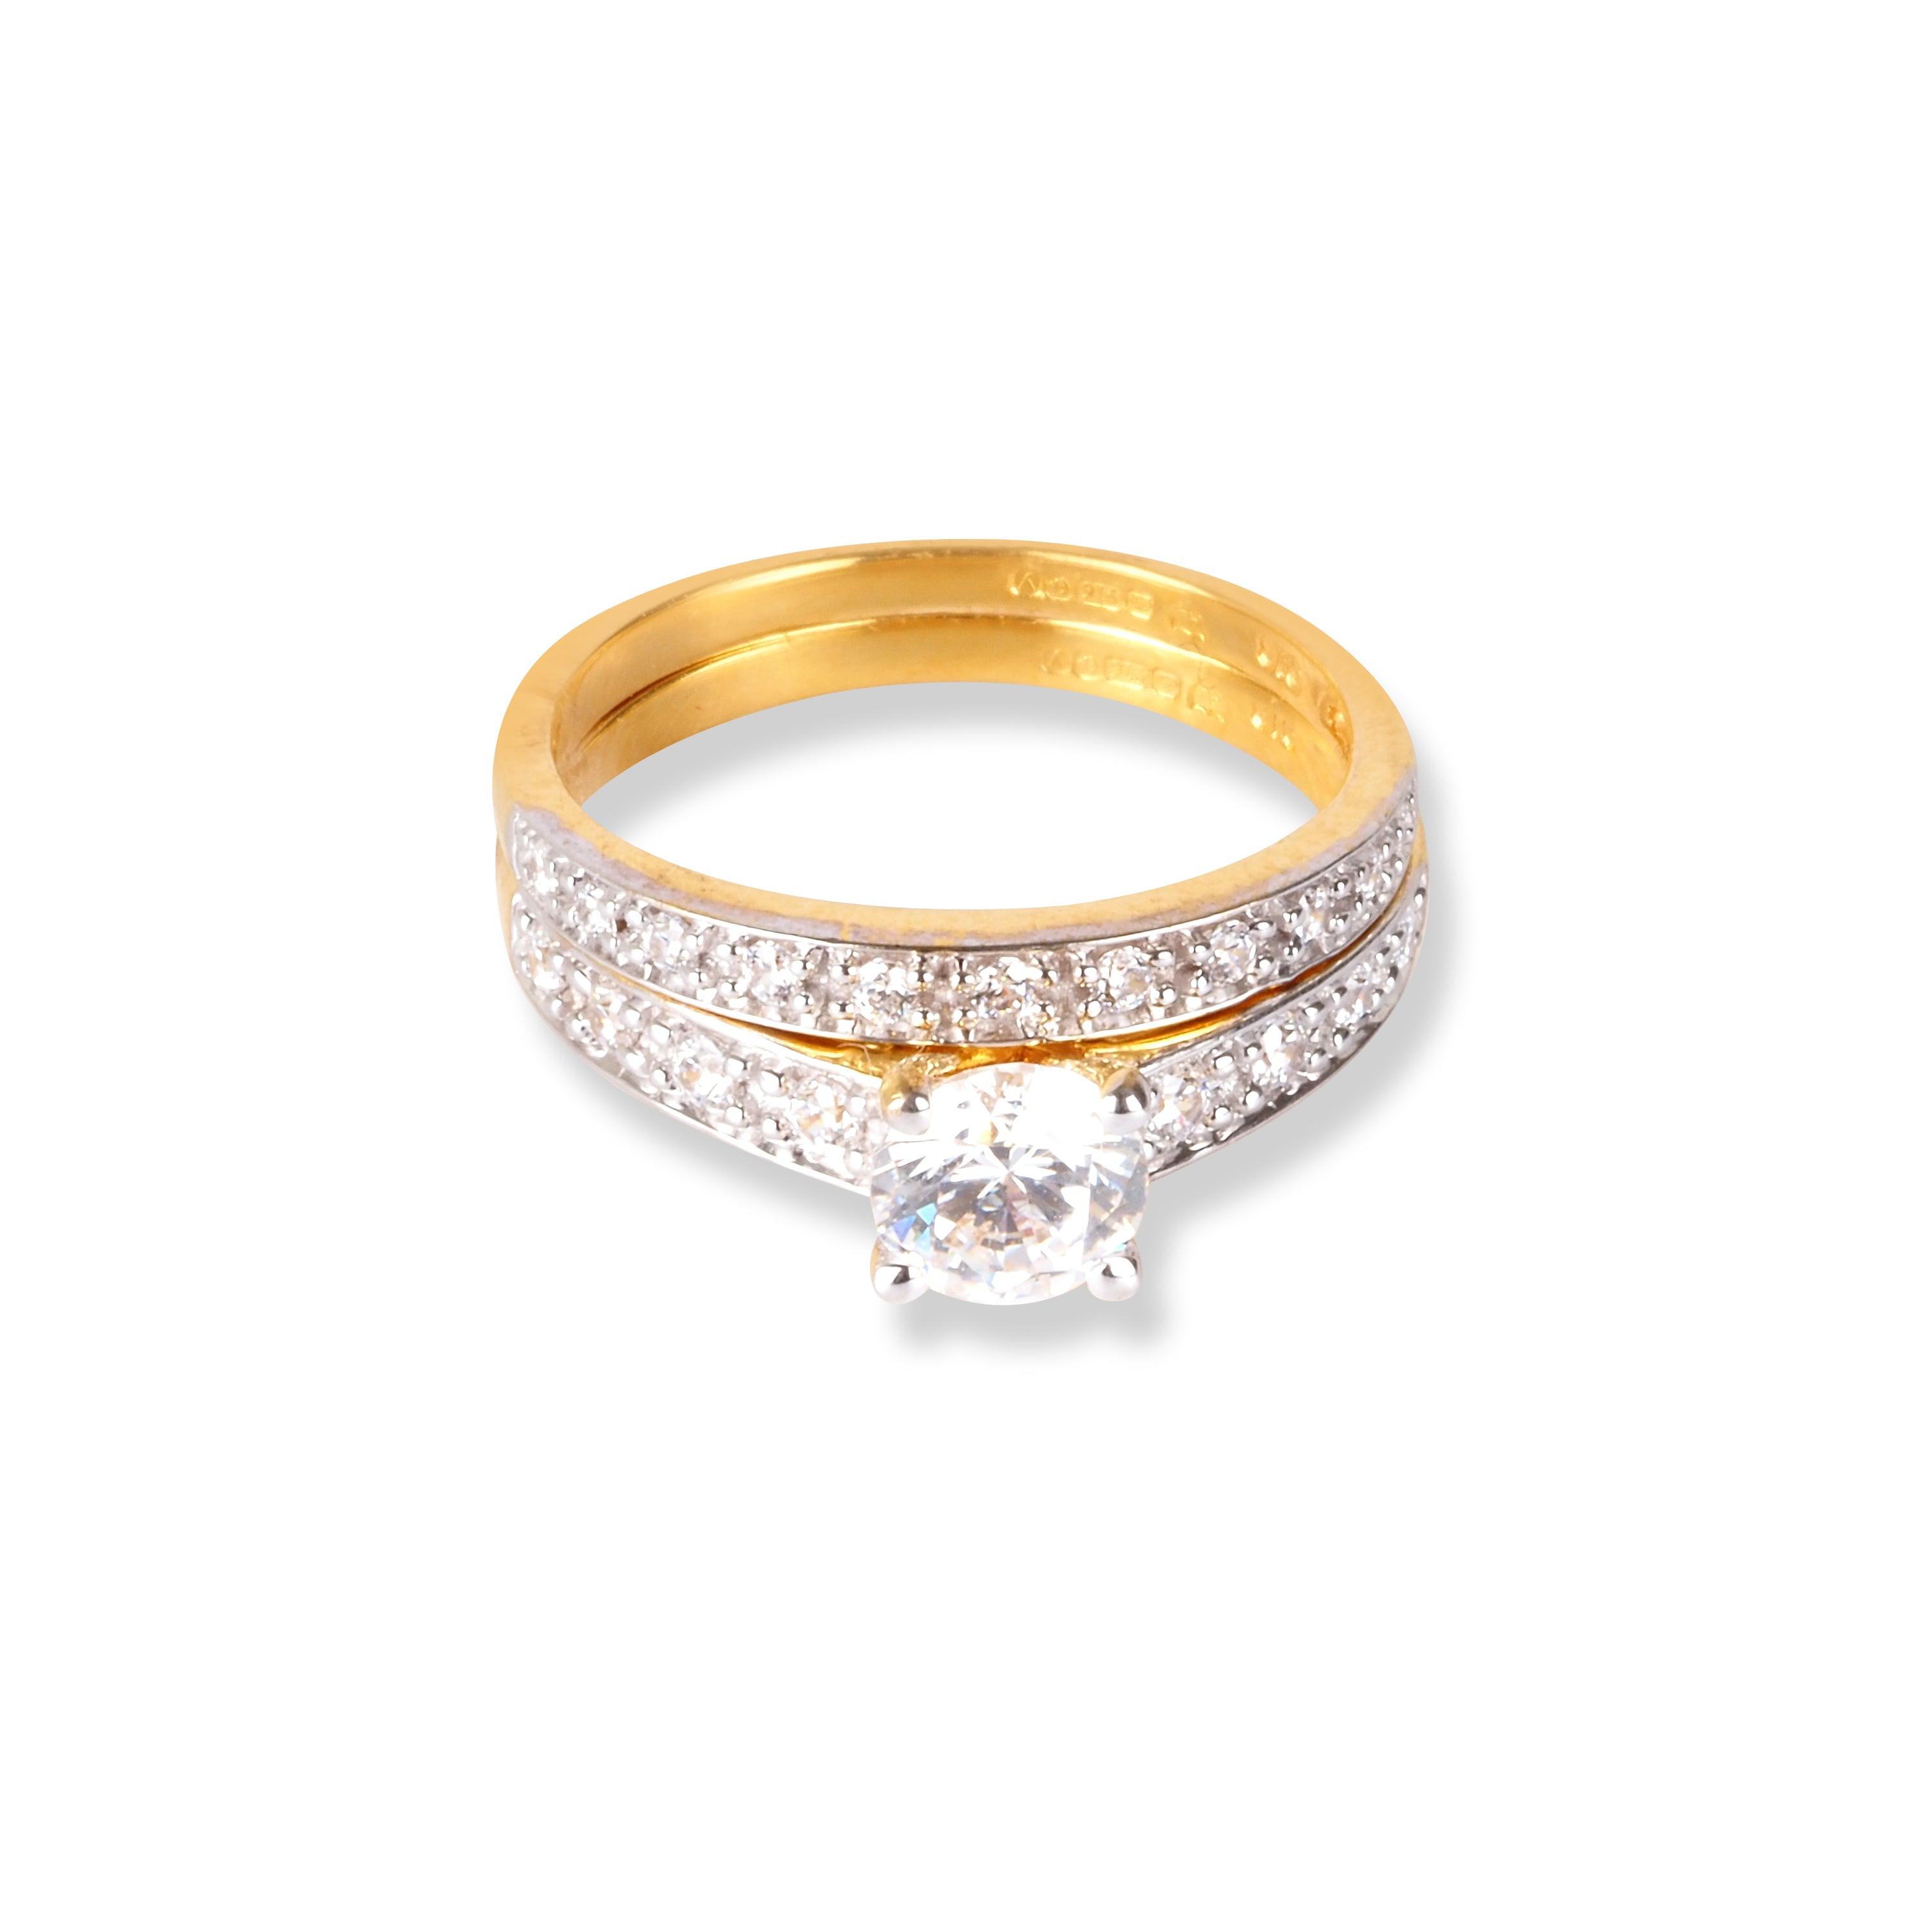 22ct Gold Engagement Ring and Wedding Band Set with Swarovski Zirconia Stones LR-6632 - Minar Jewellers